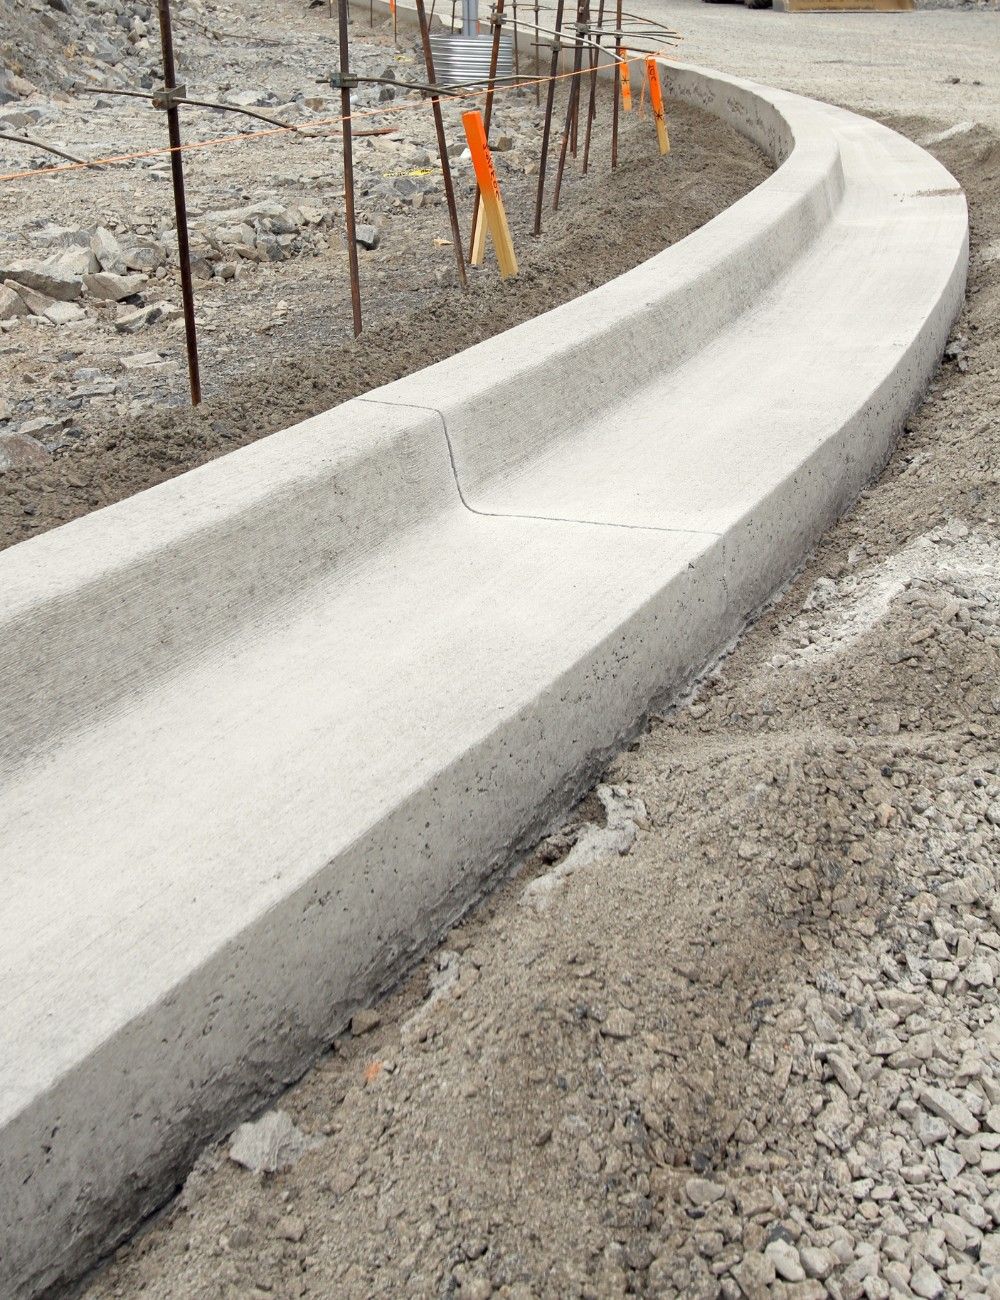 A freshly constructed decorative concrete curb curves smoothly along a dirt path. Wooden stakes with orange flags line the path on the opposite side of the curb, indicating an ongoing construction project. The surrounding area is cluttered with gravel and construction materials.